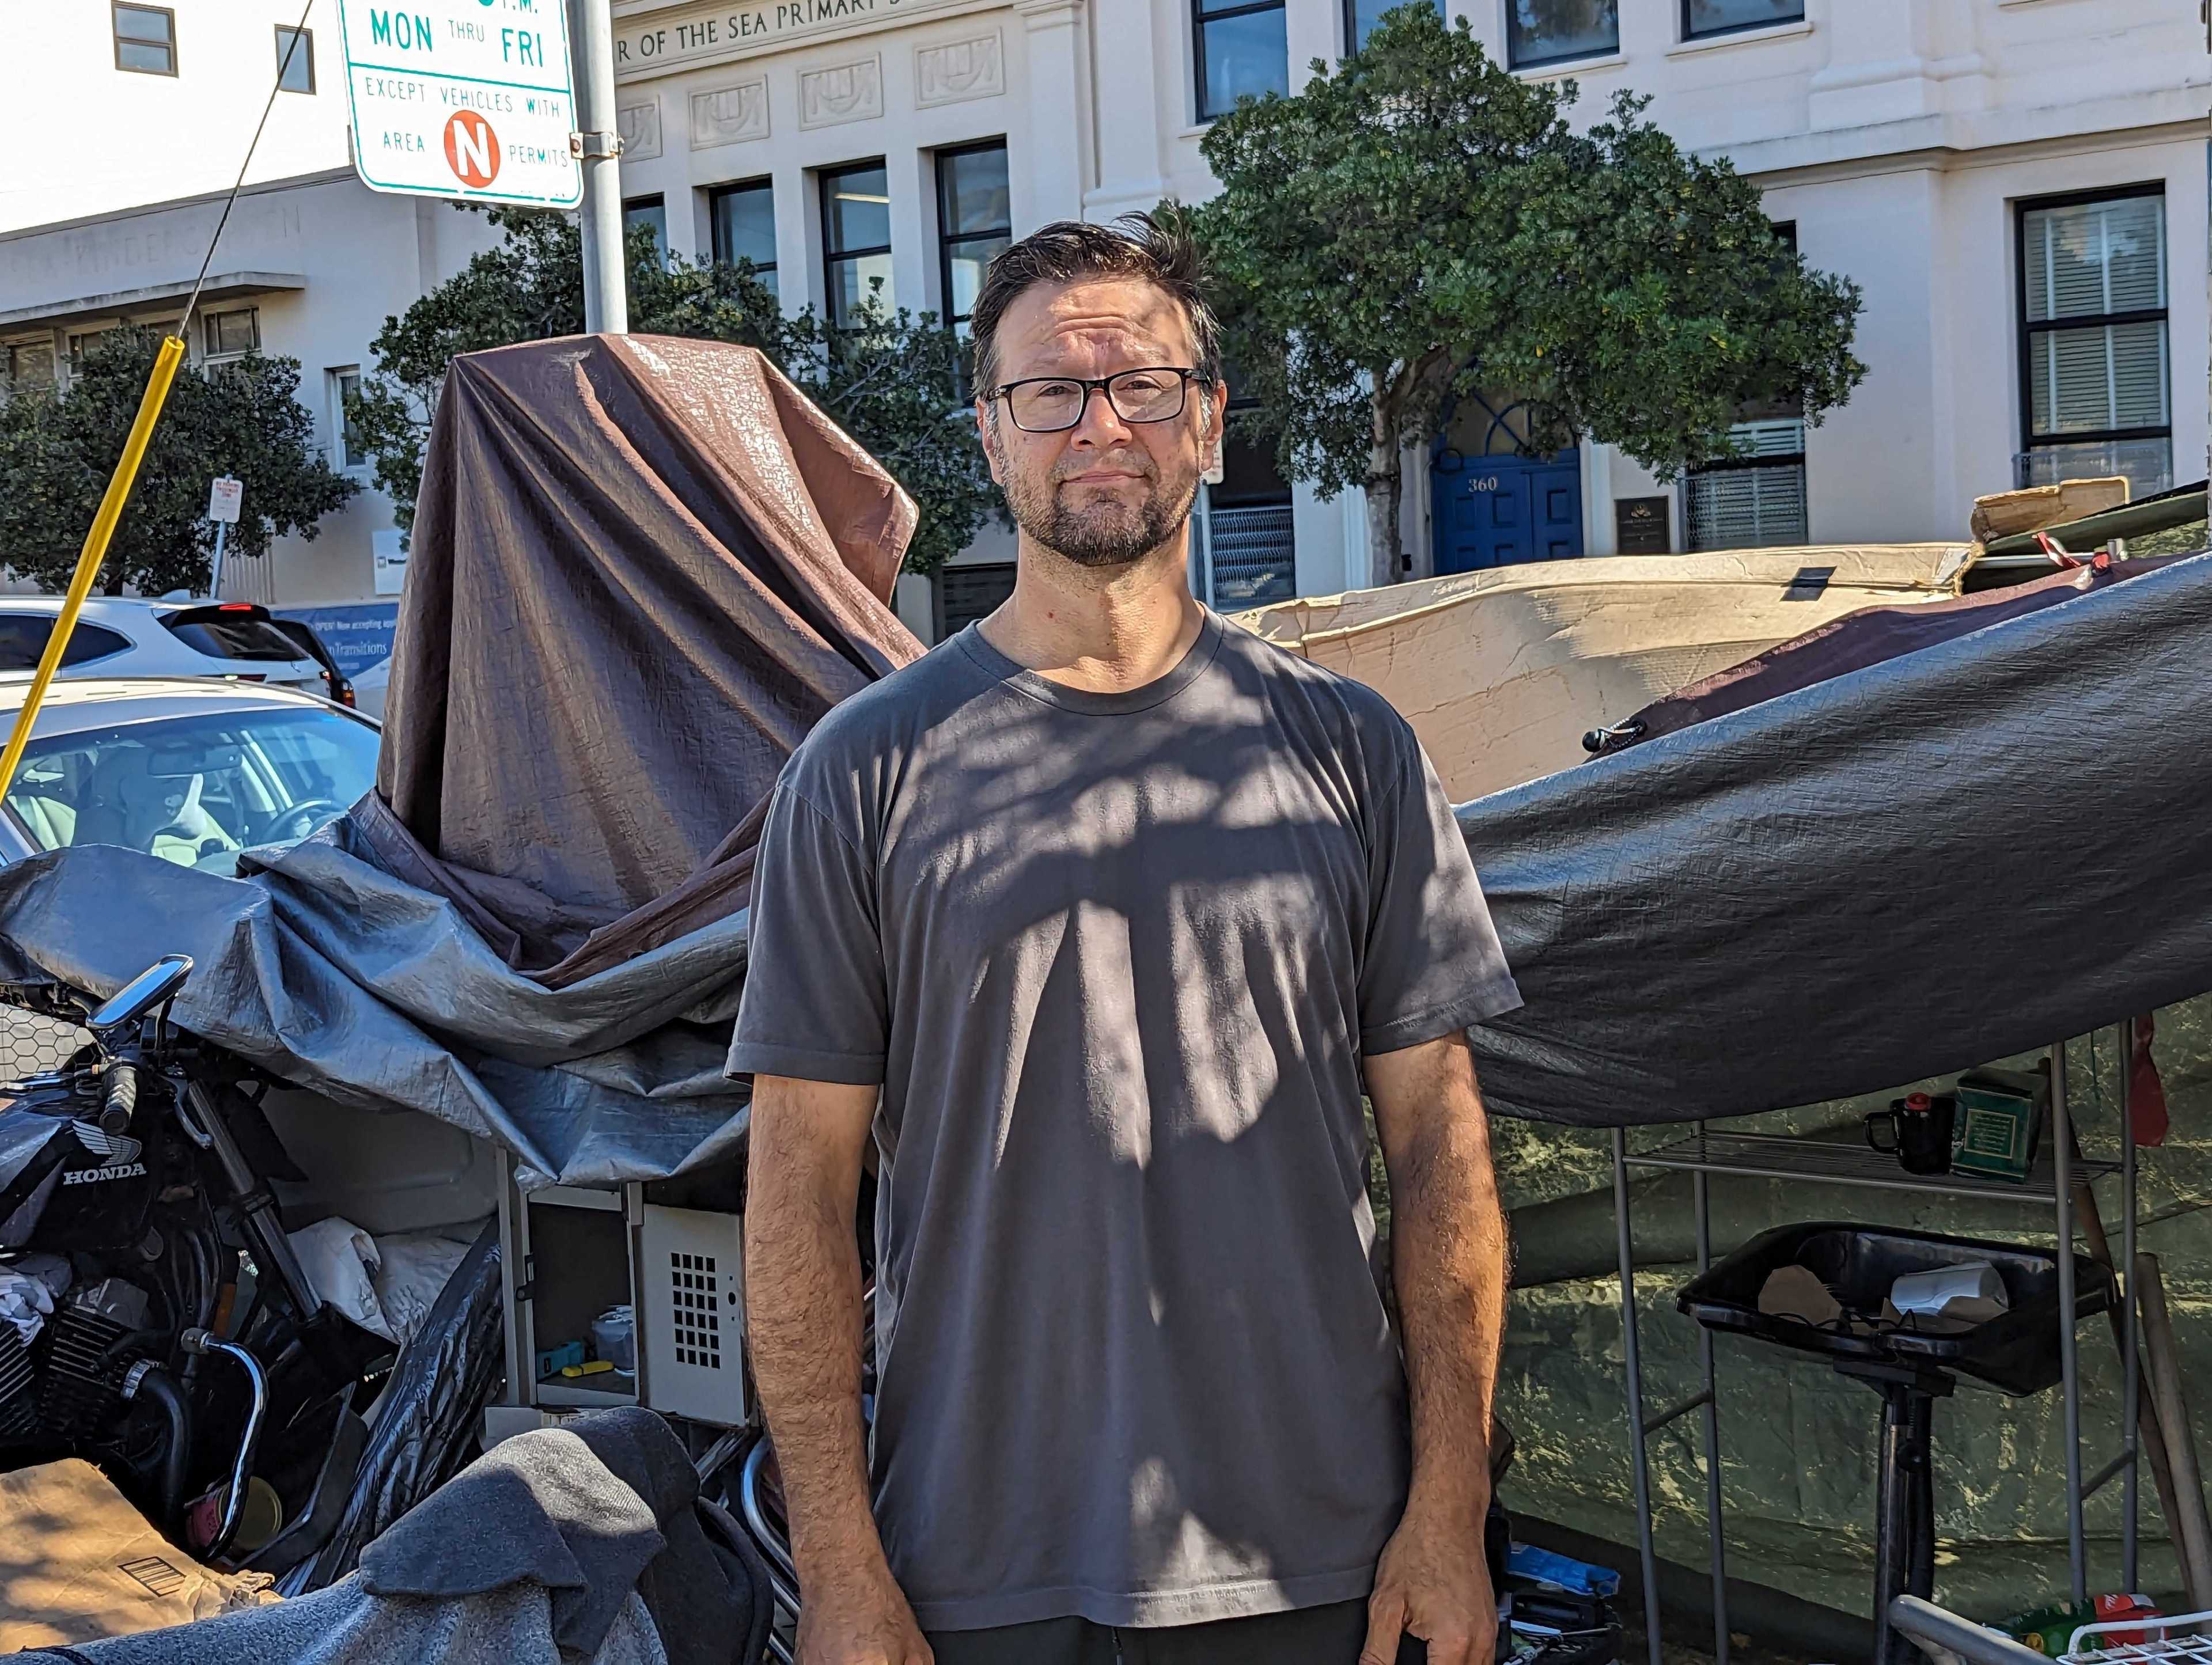 Joseph Adam Moore stands next to his encampment on Ninth Avenue north of Geary Boulevard in San Francisco's Inner Richmond neighborhood.